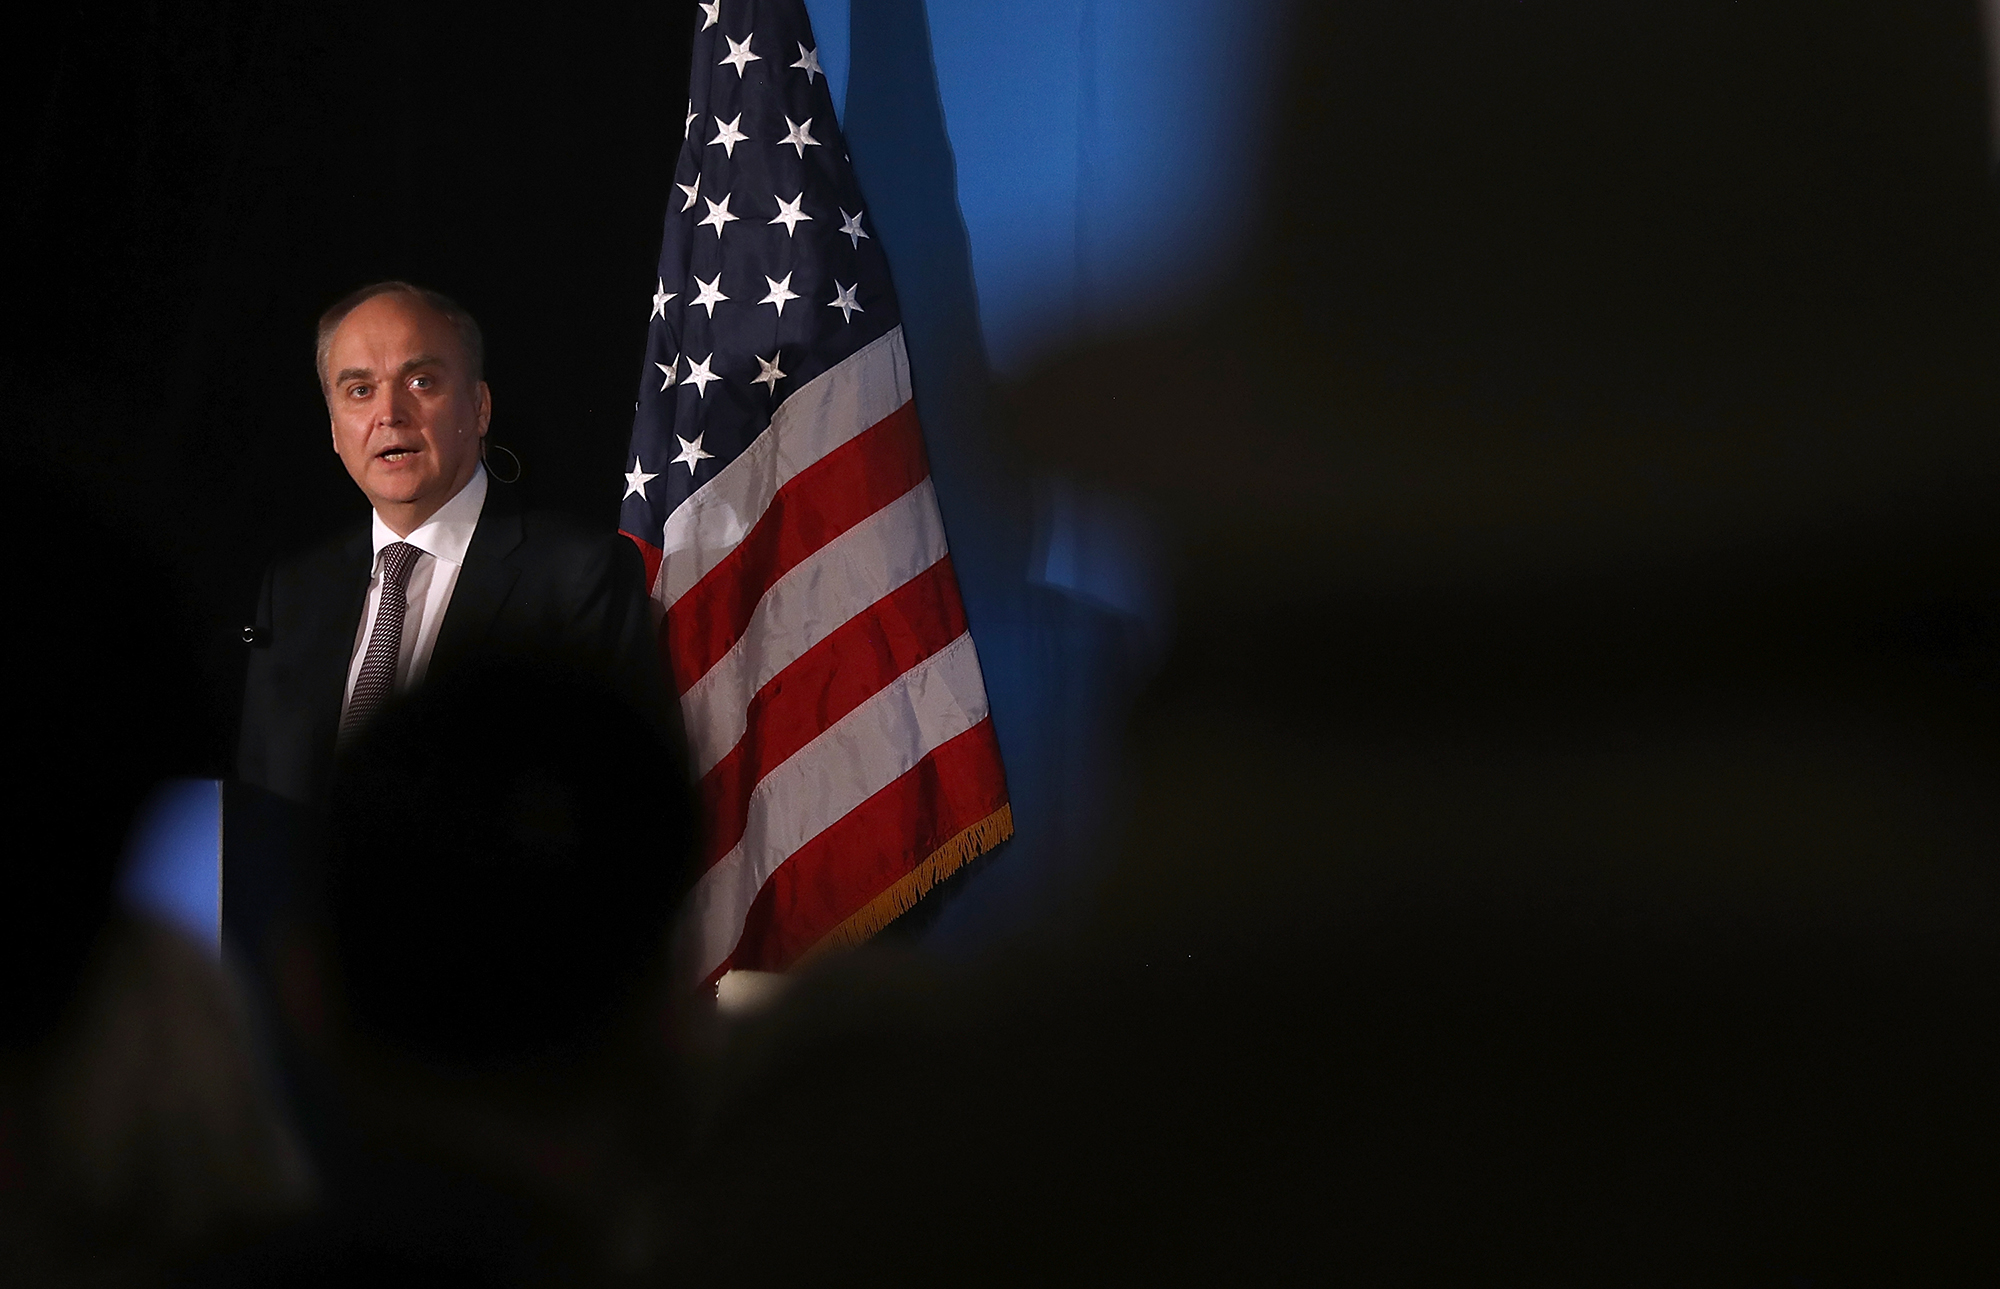 Russia Ambassador to the U.S. Anatoly Antonov speaks during a World Affairs event at the Fairmont Hotel on November 29, 2017 in San Francisco, California. 